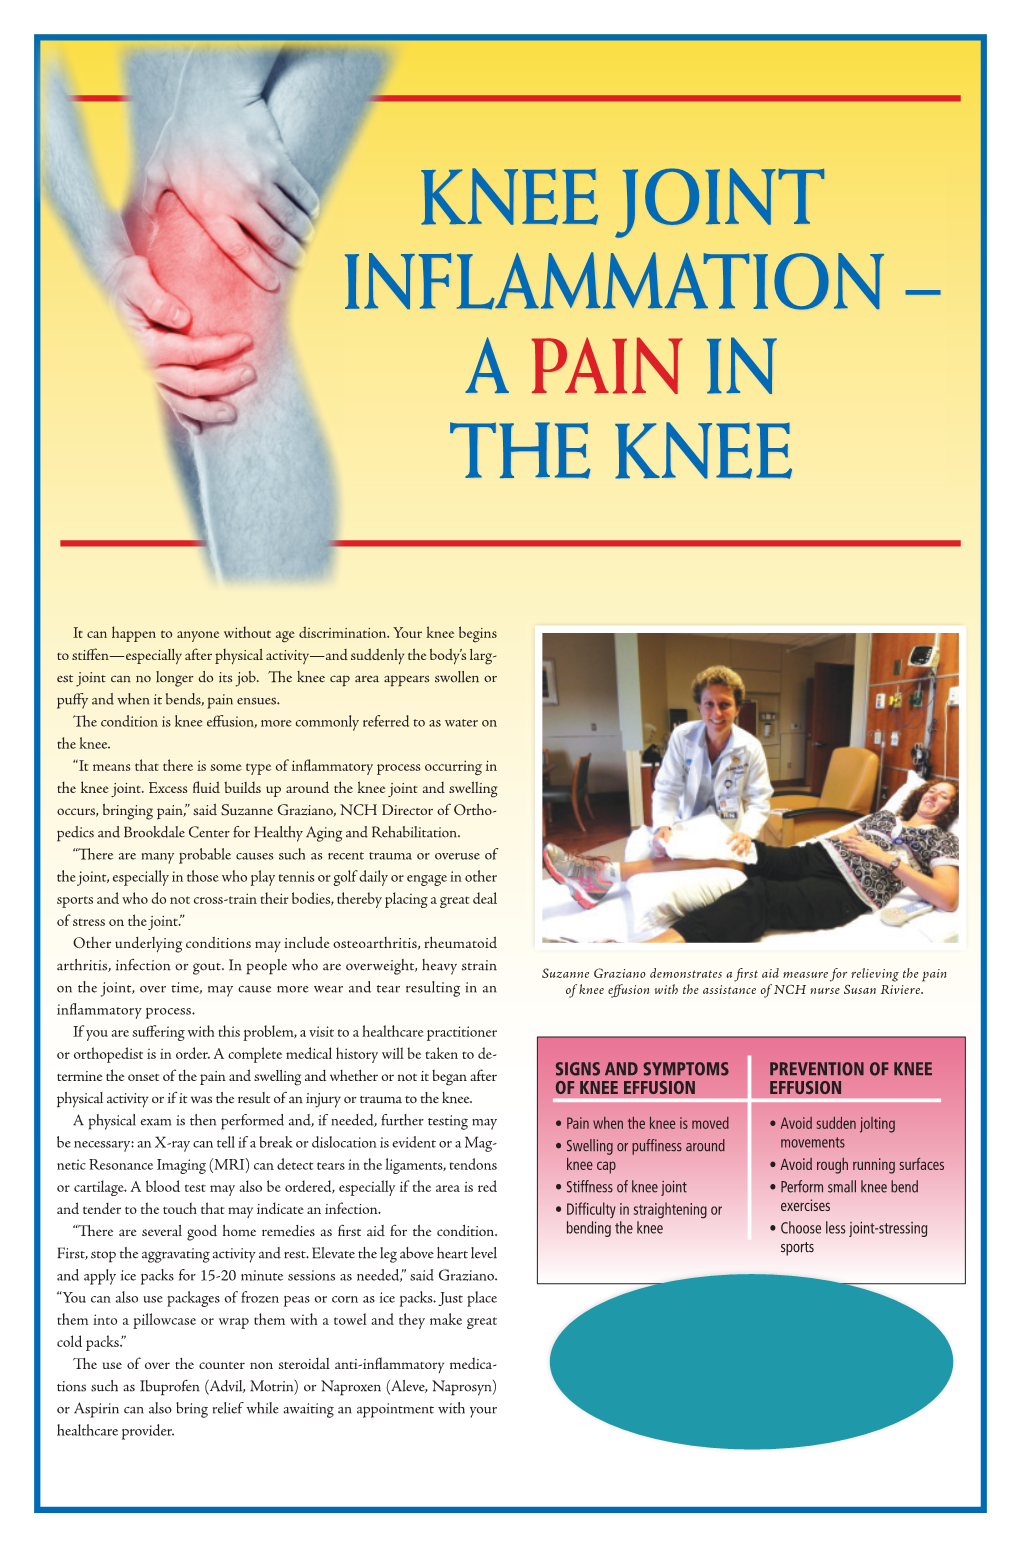 Knee Joint Inflammation – a Pain in the Knee